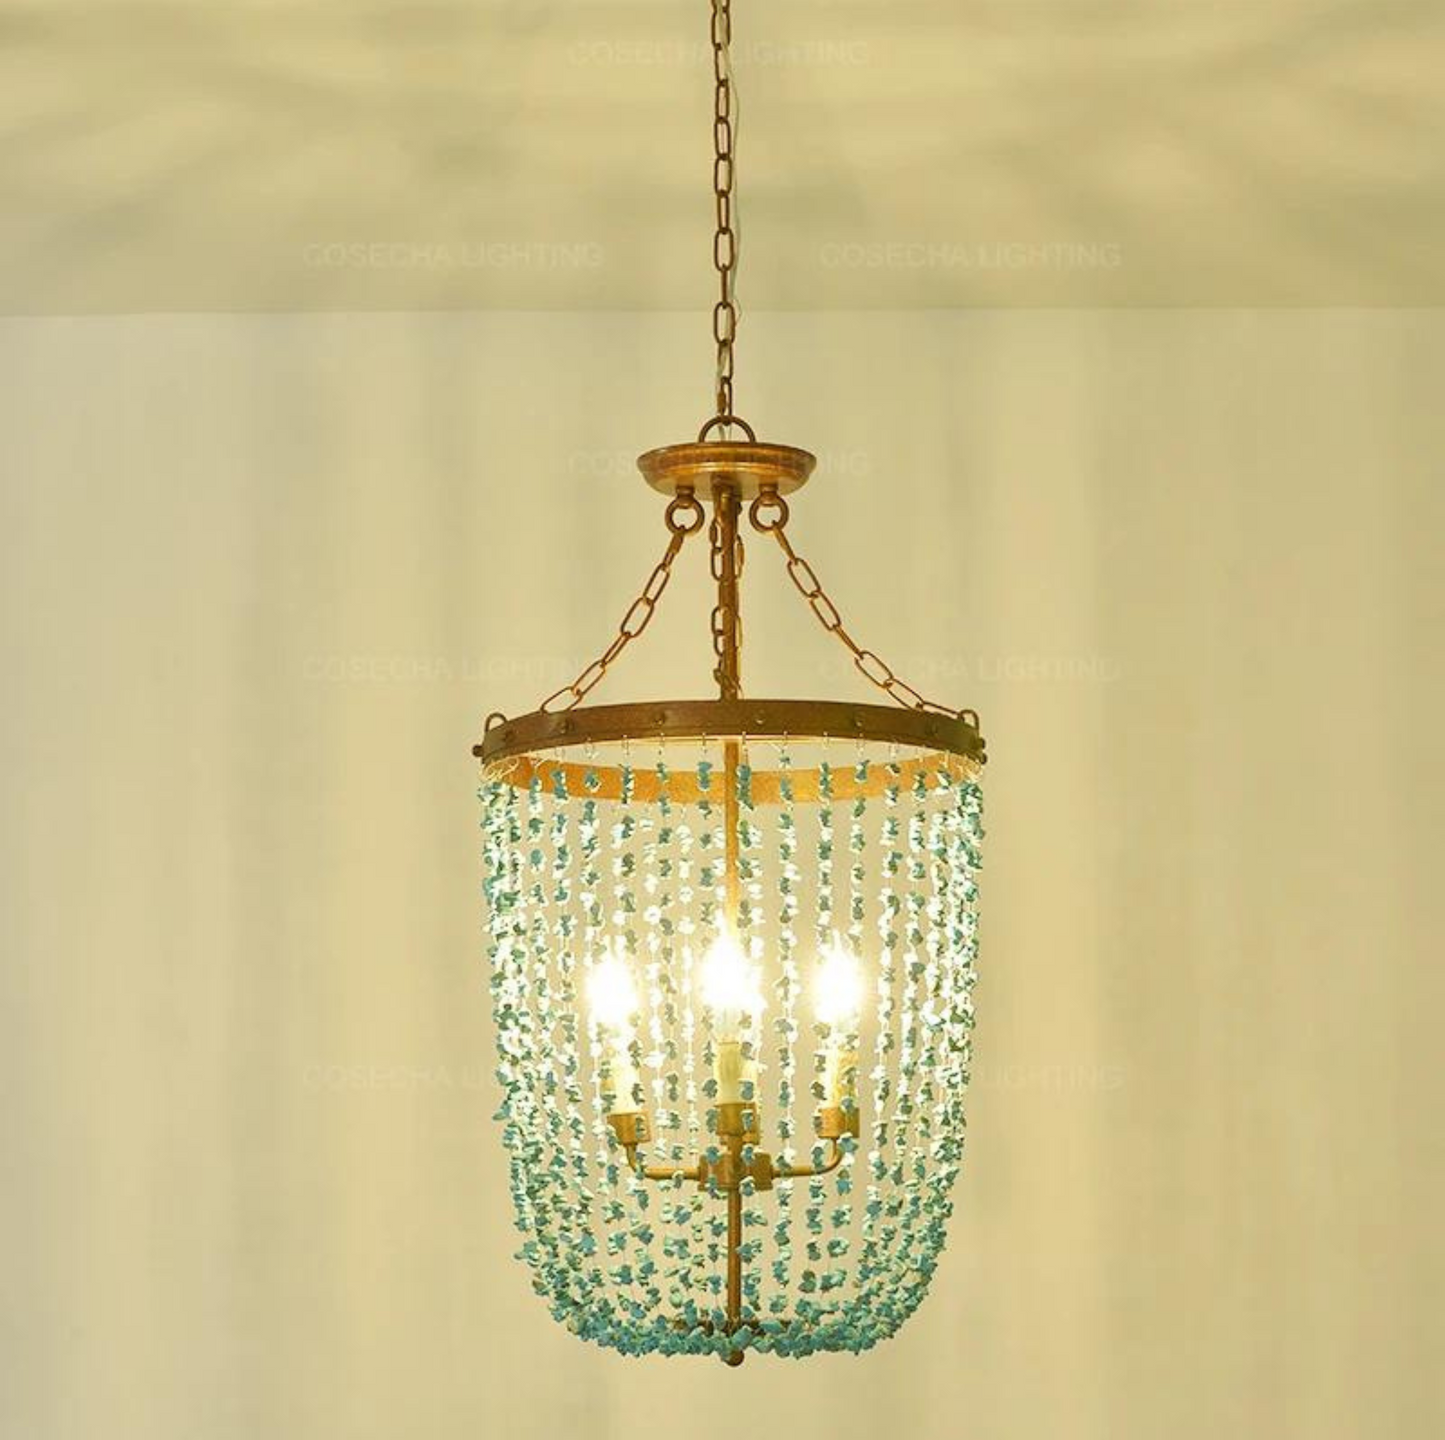 Turquoise Stone Chandelier by Gloss (9120/4)